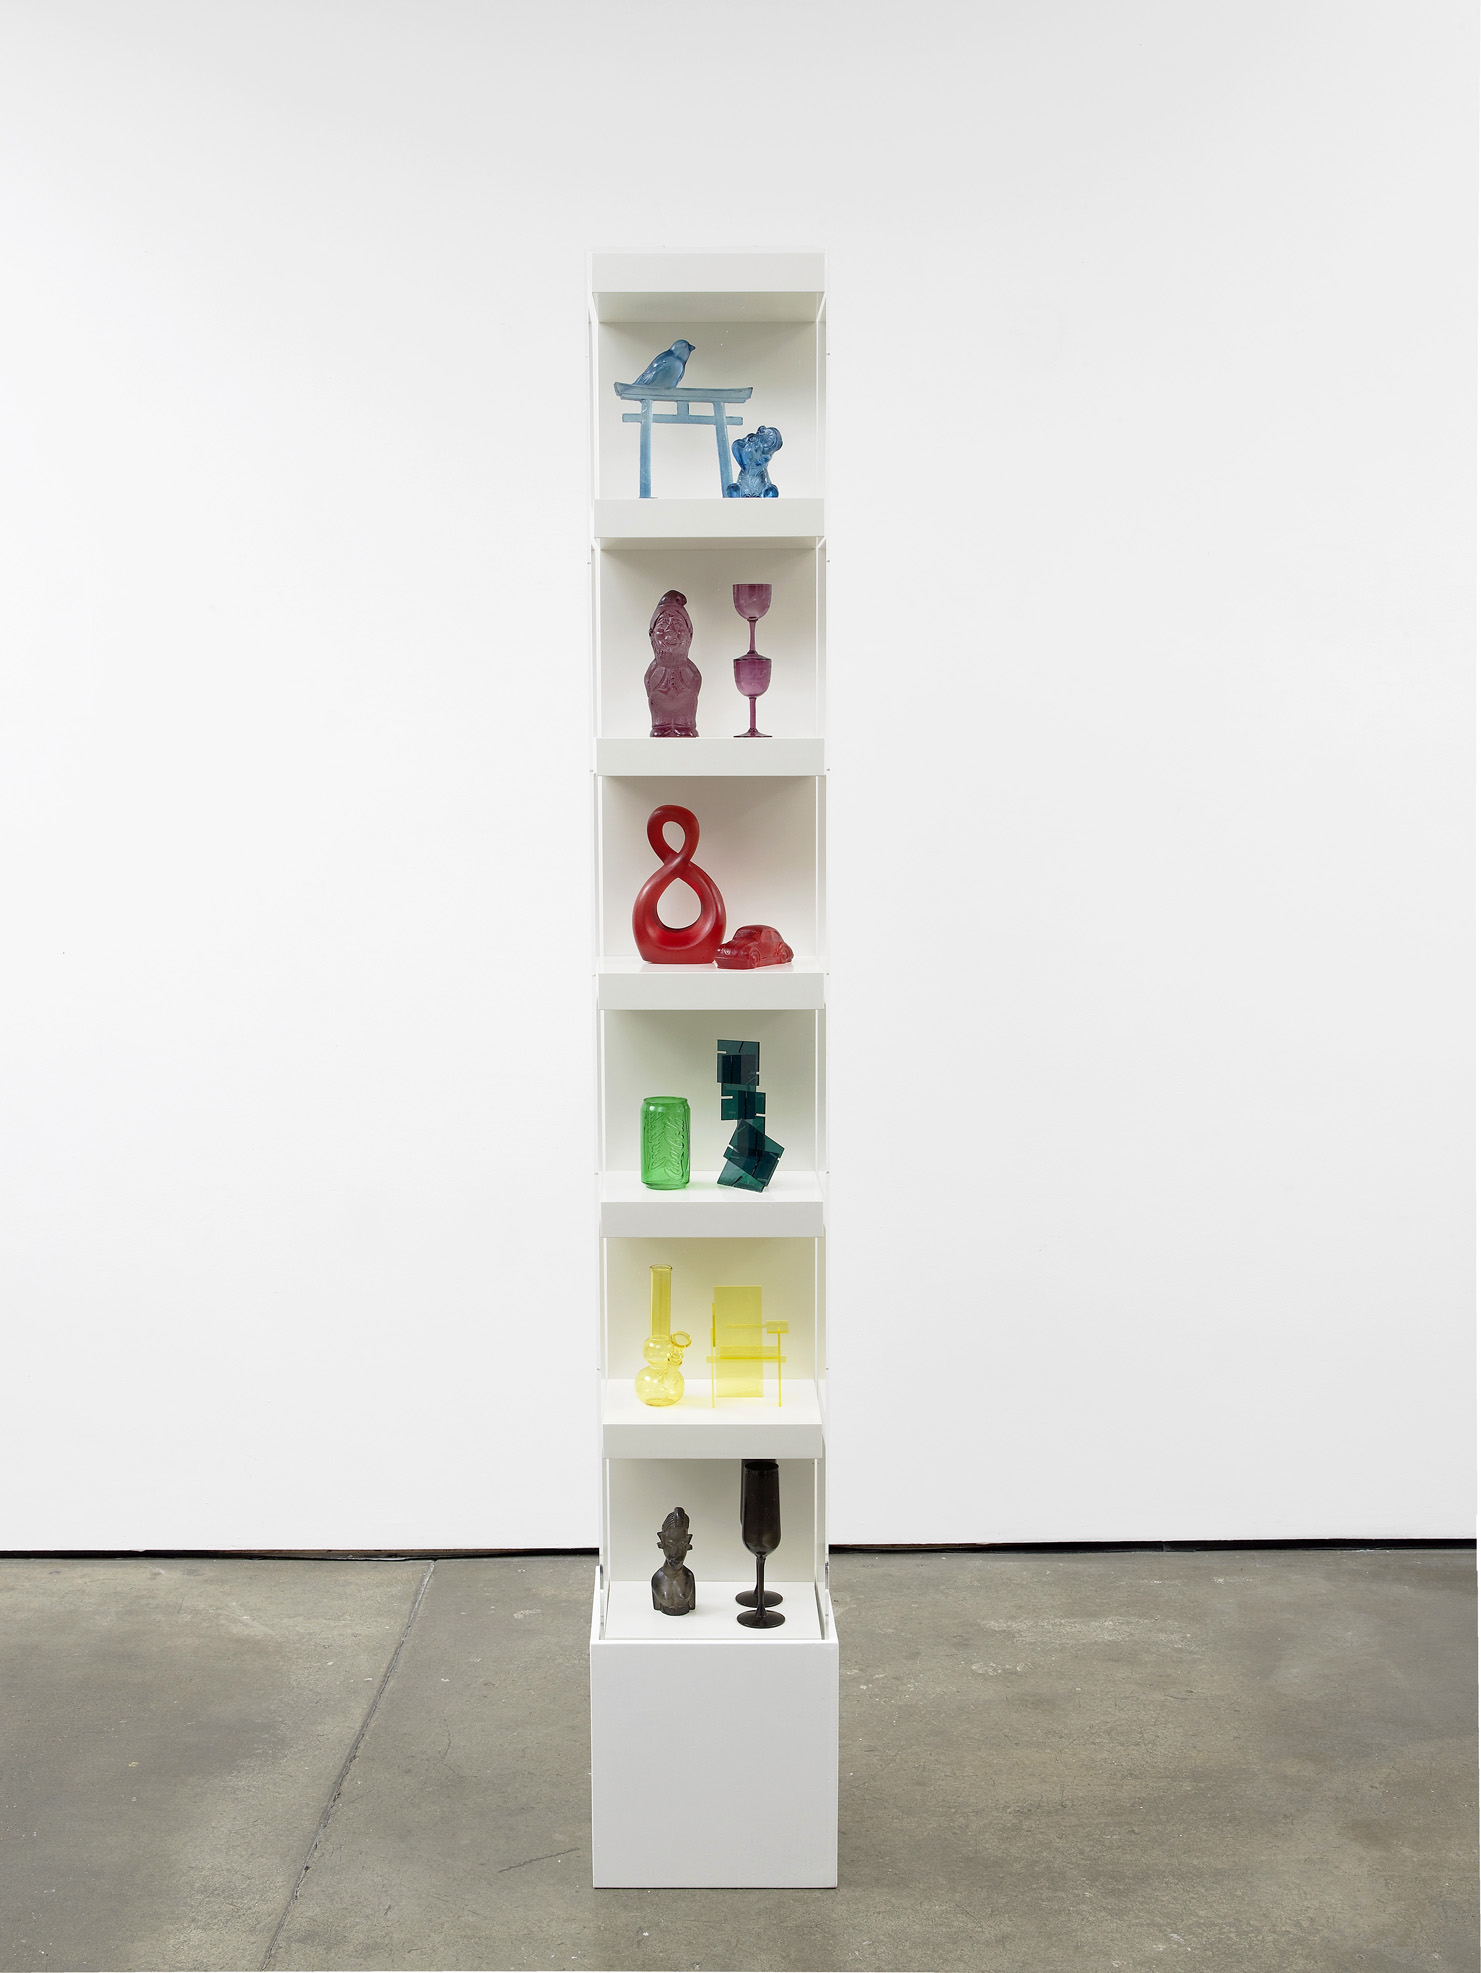     Matthew Darbyshire Untitled: Accessorised Column No. 5 2012 Plastic, glass, and resin components, shelving units, and perspex case 215 x 30 x 30 cm    